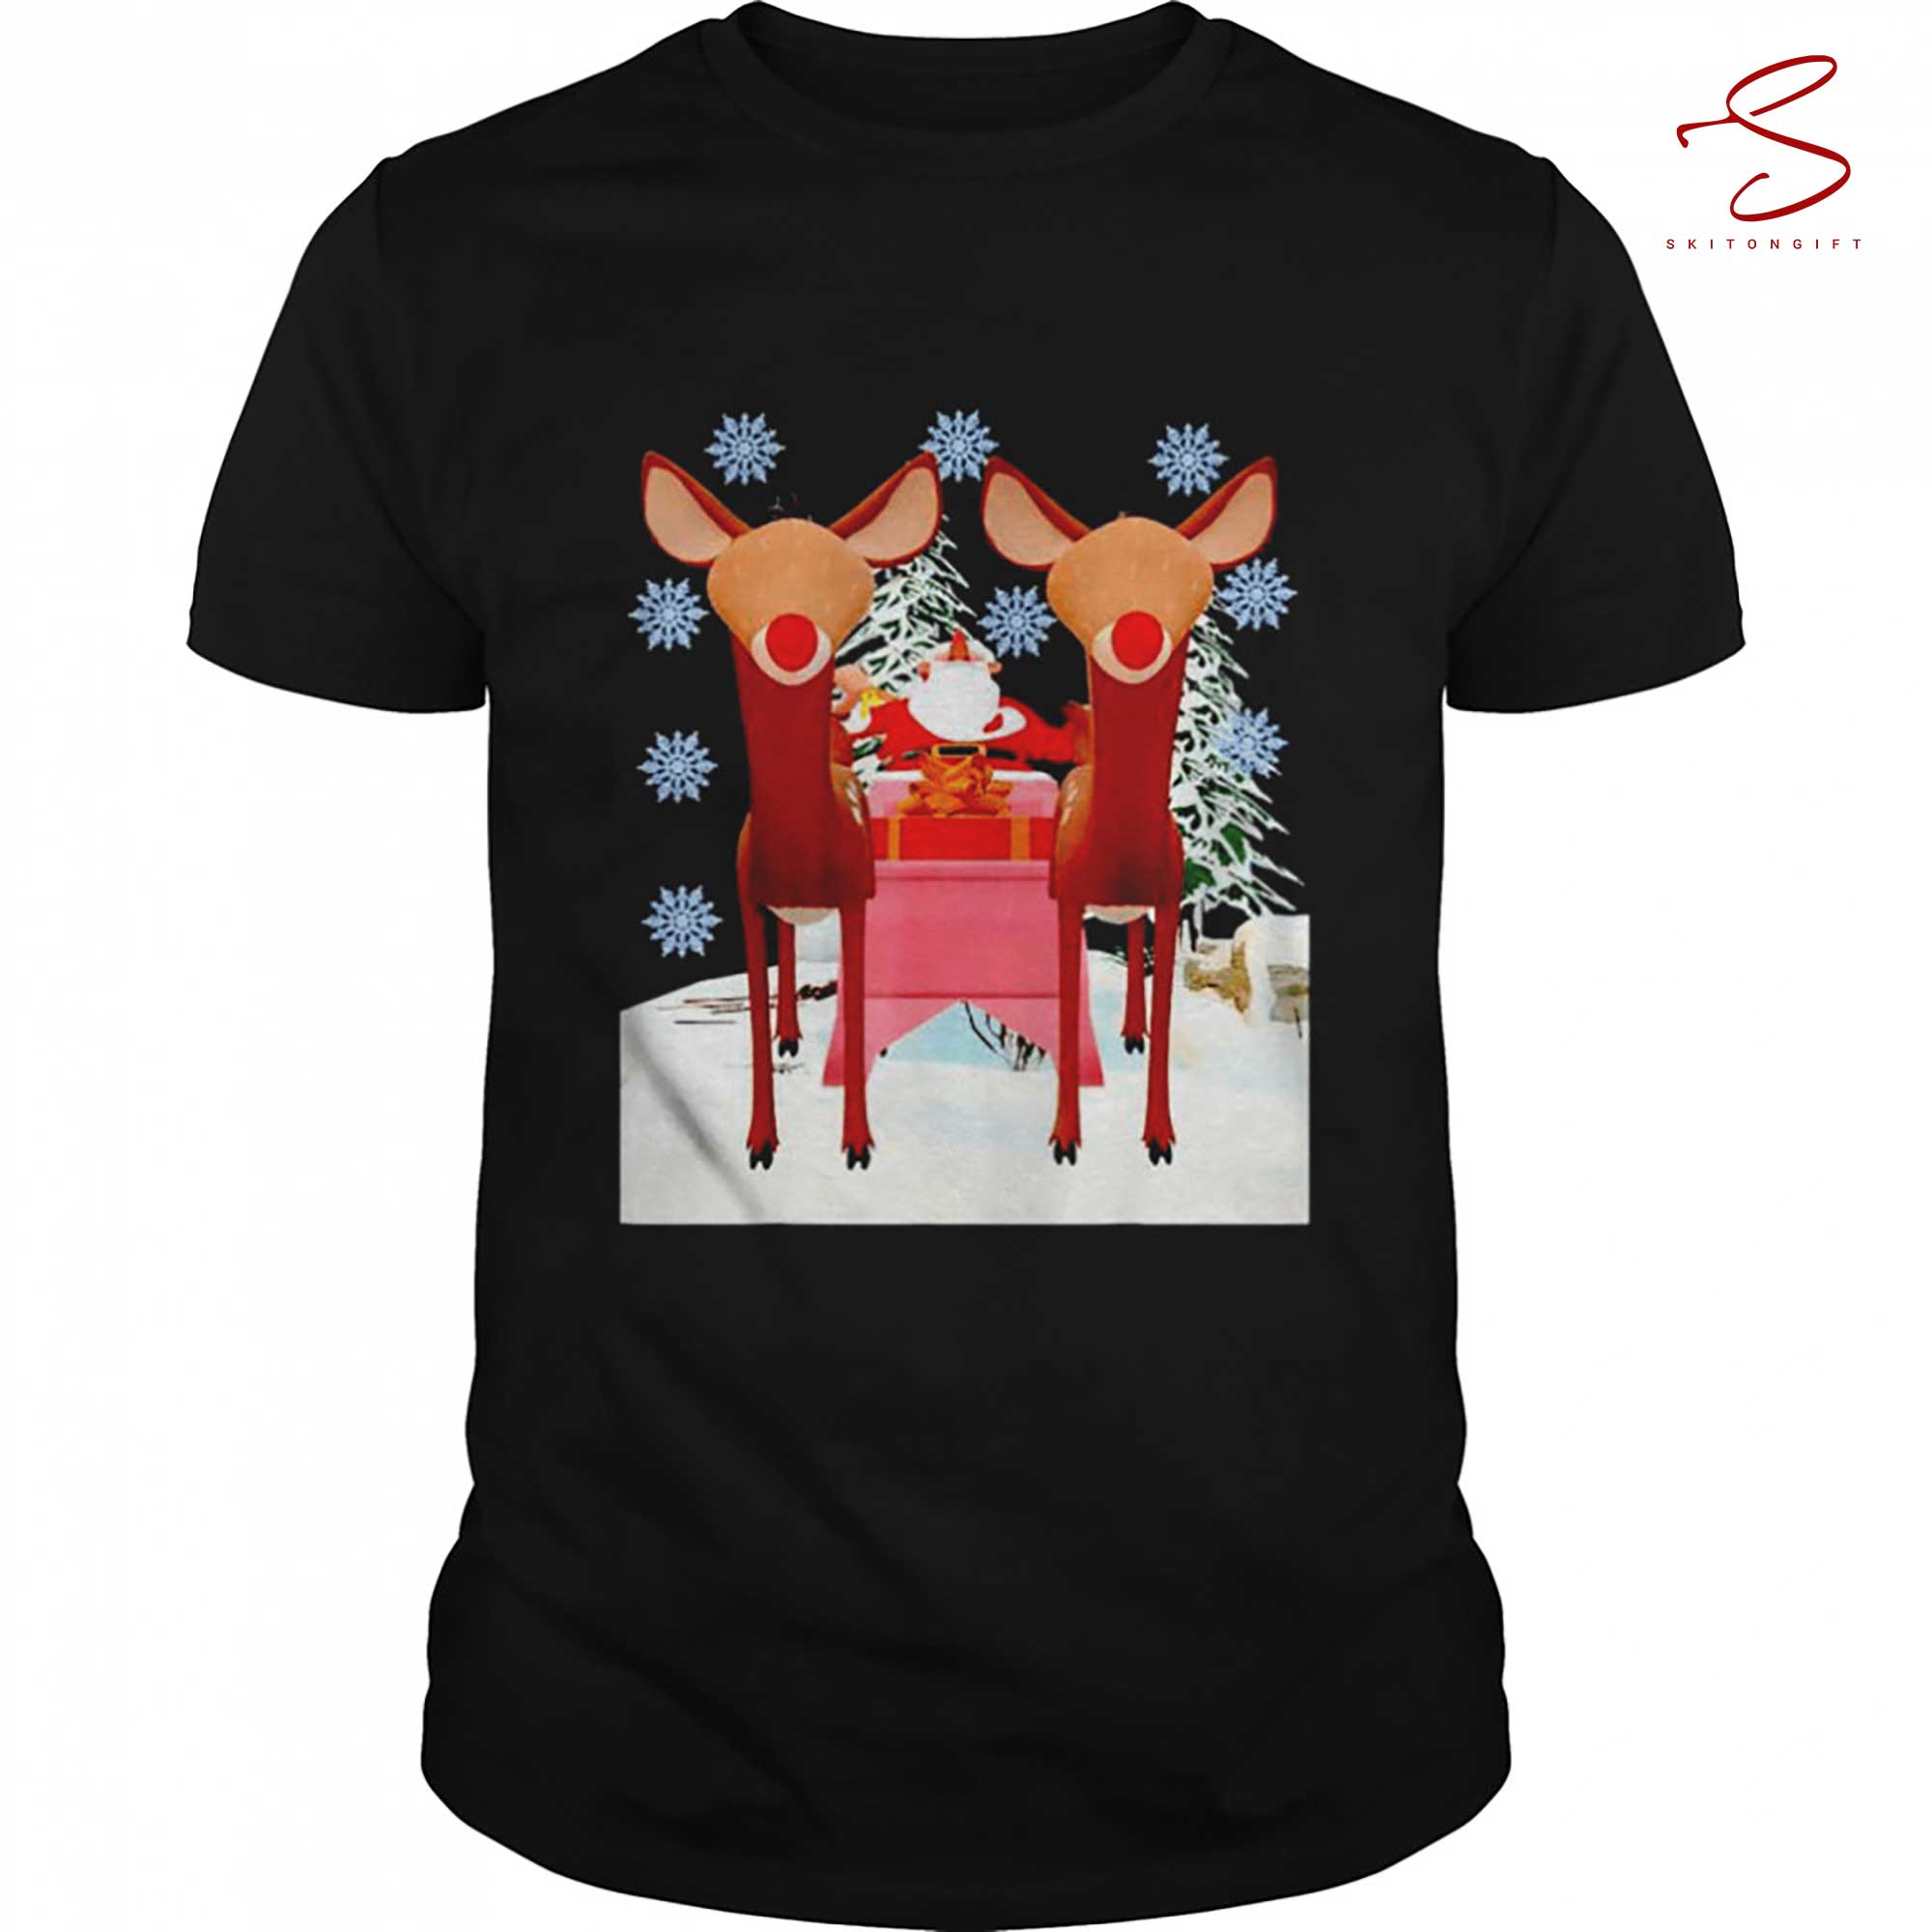 Skitongift Santa With Two Red Nosed Reindeers Christmas Shirt